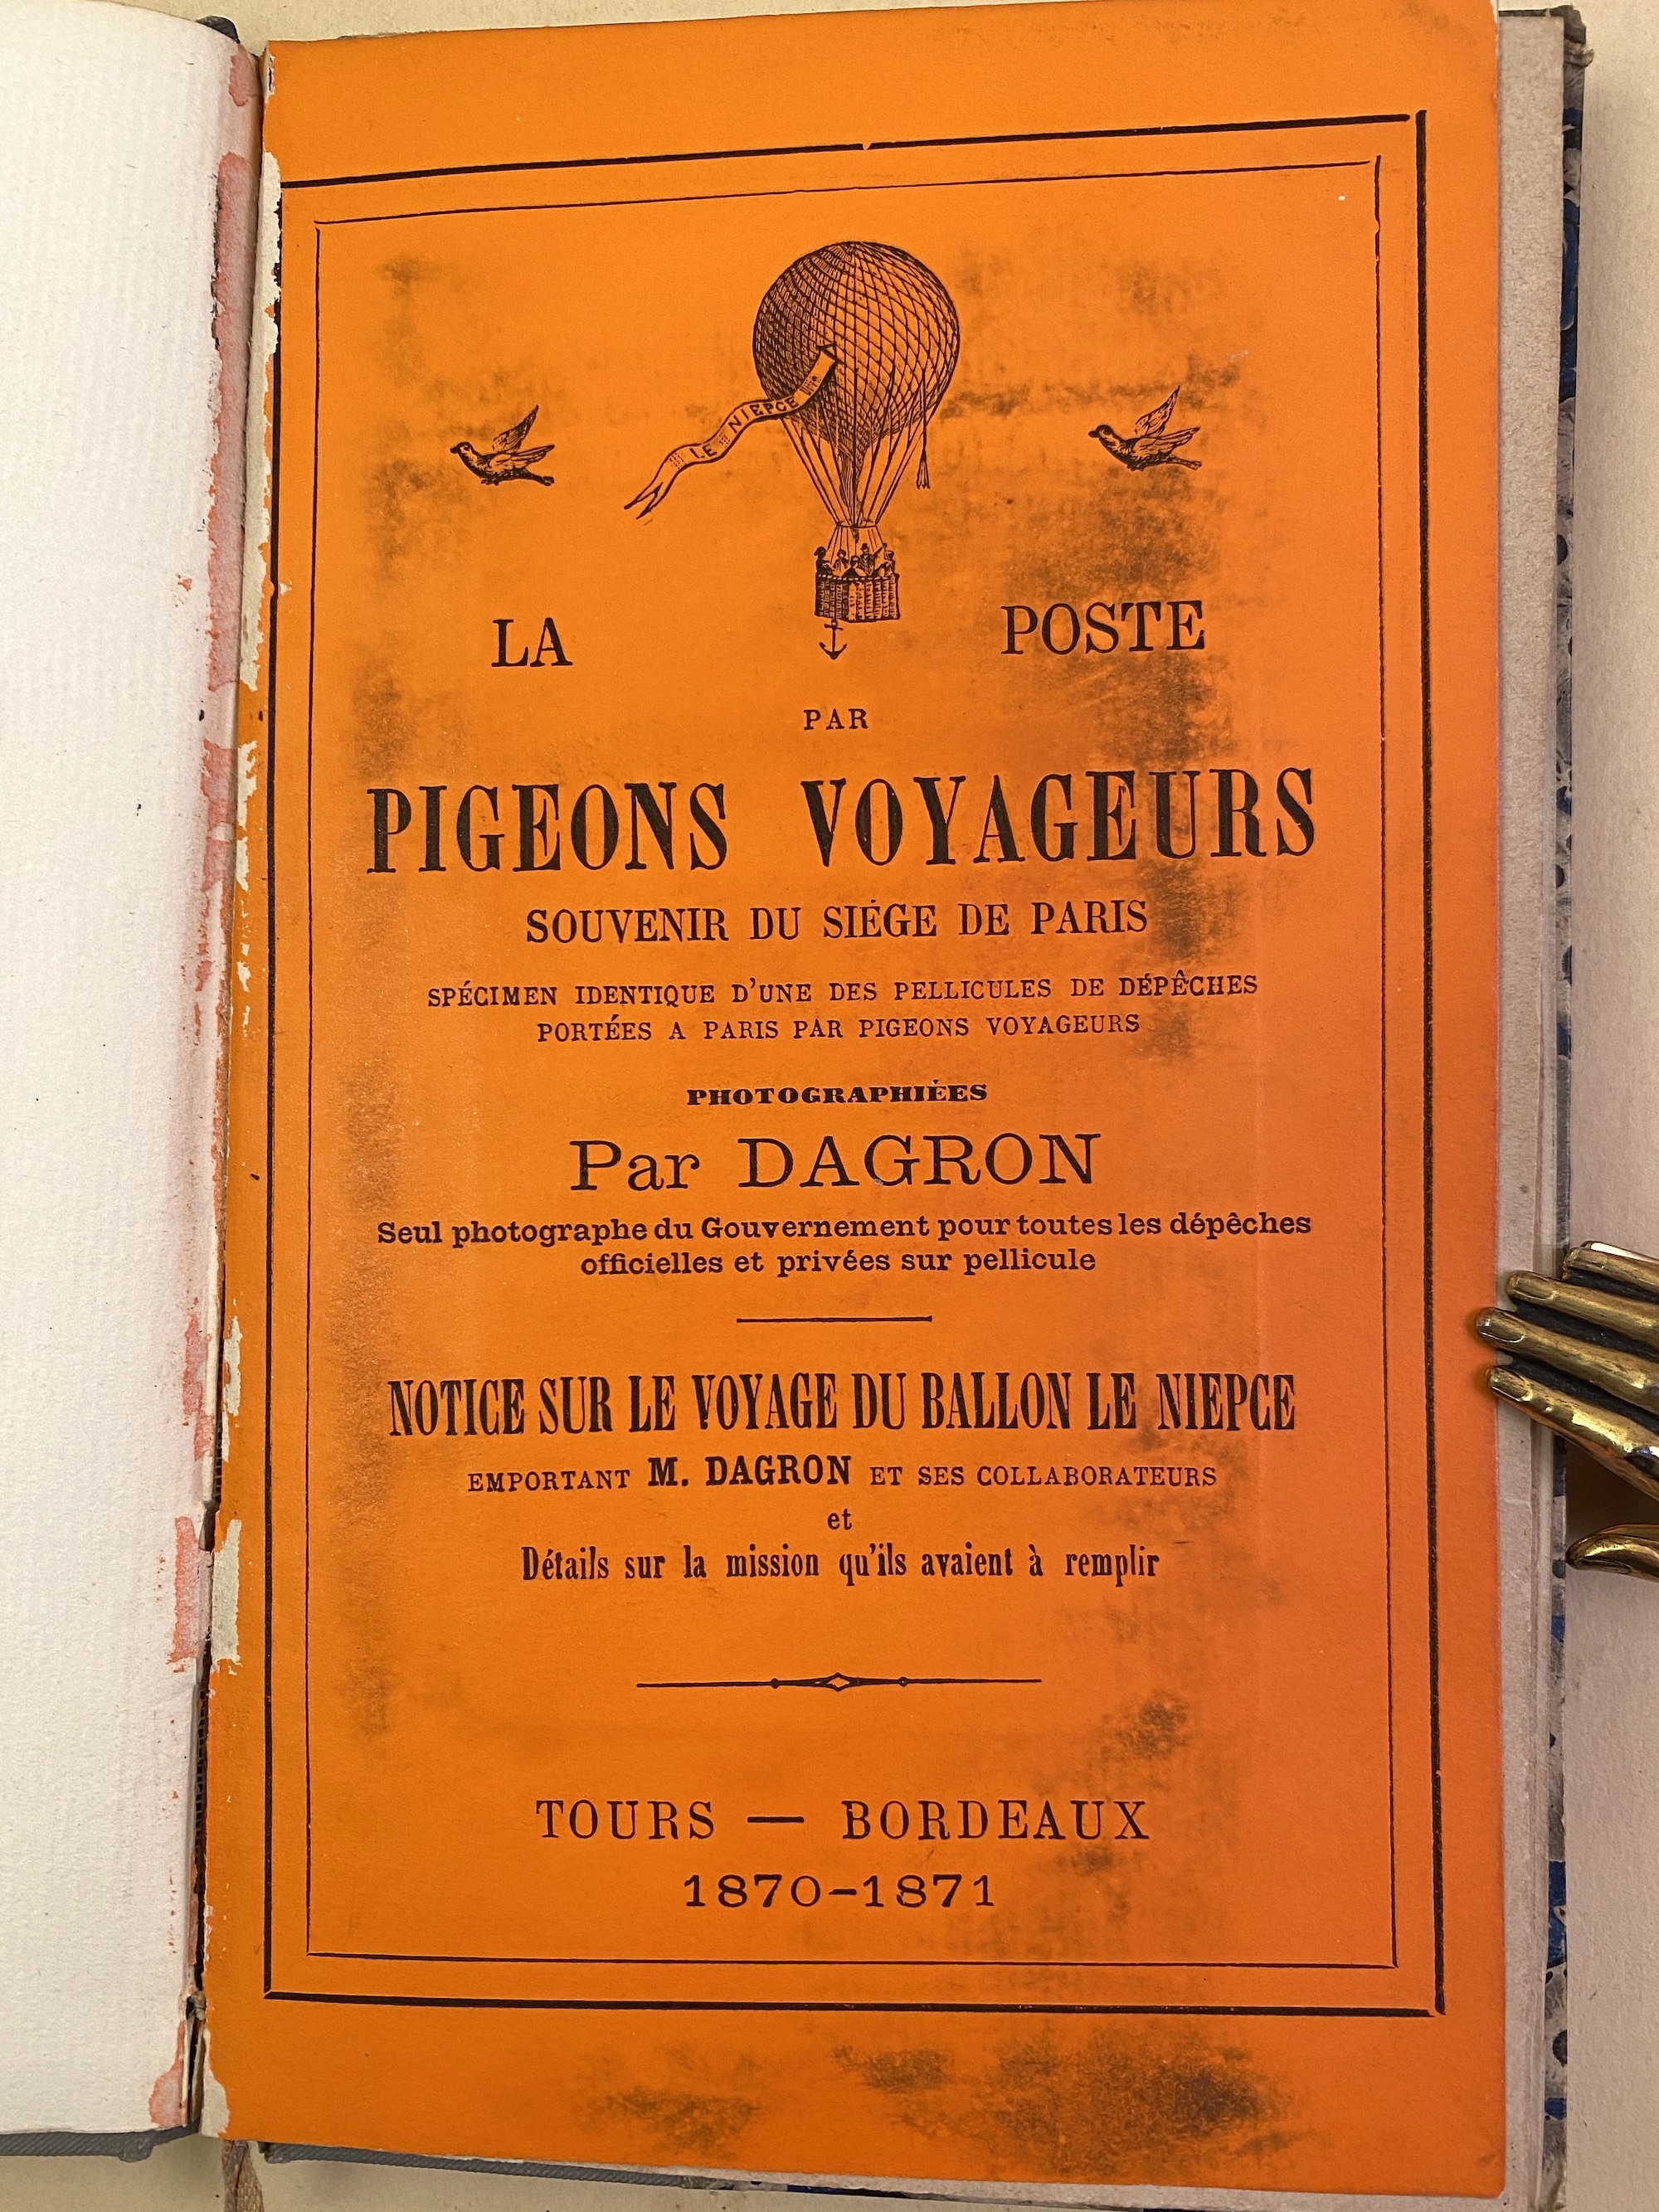 Orange printed wrapper of Dagron's pamphlet on the pigeon post.